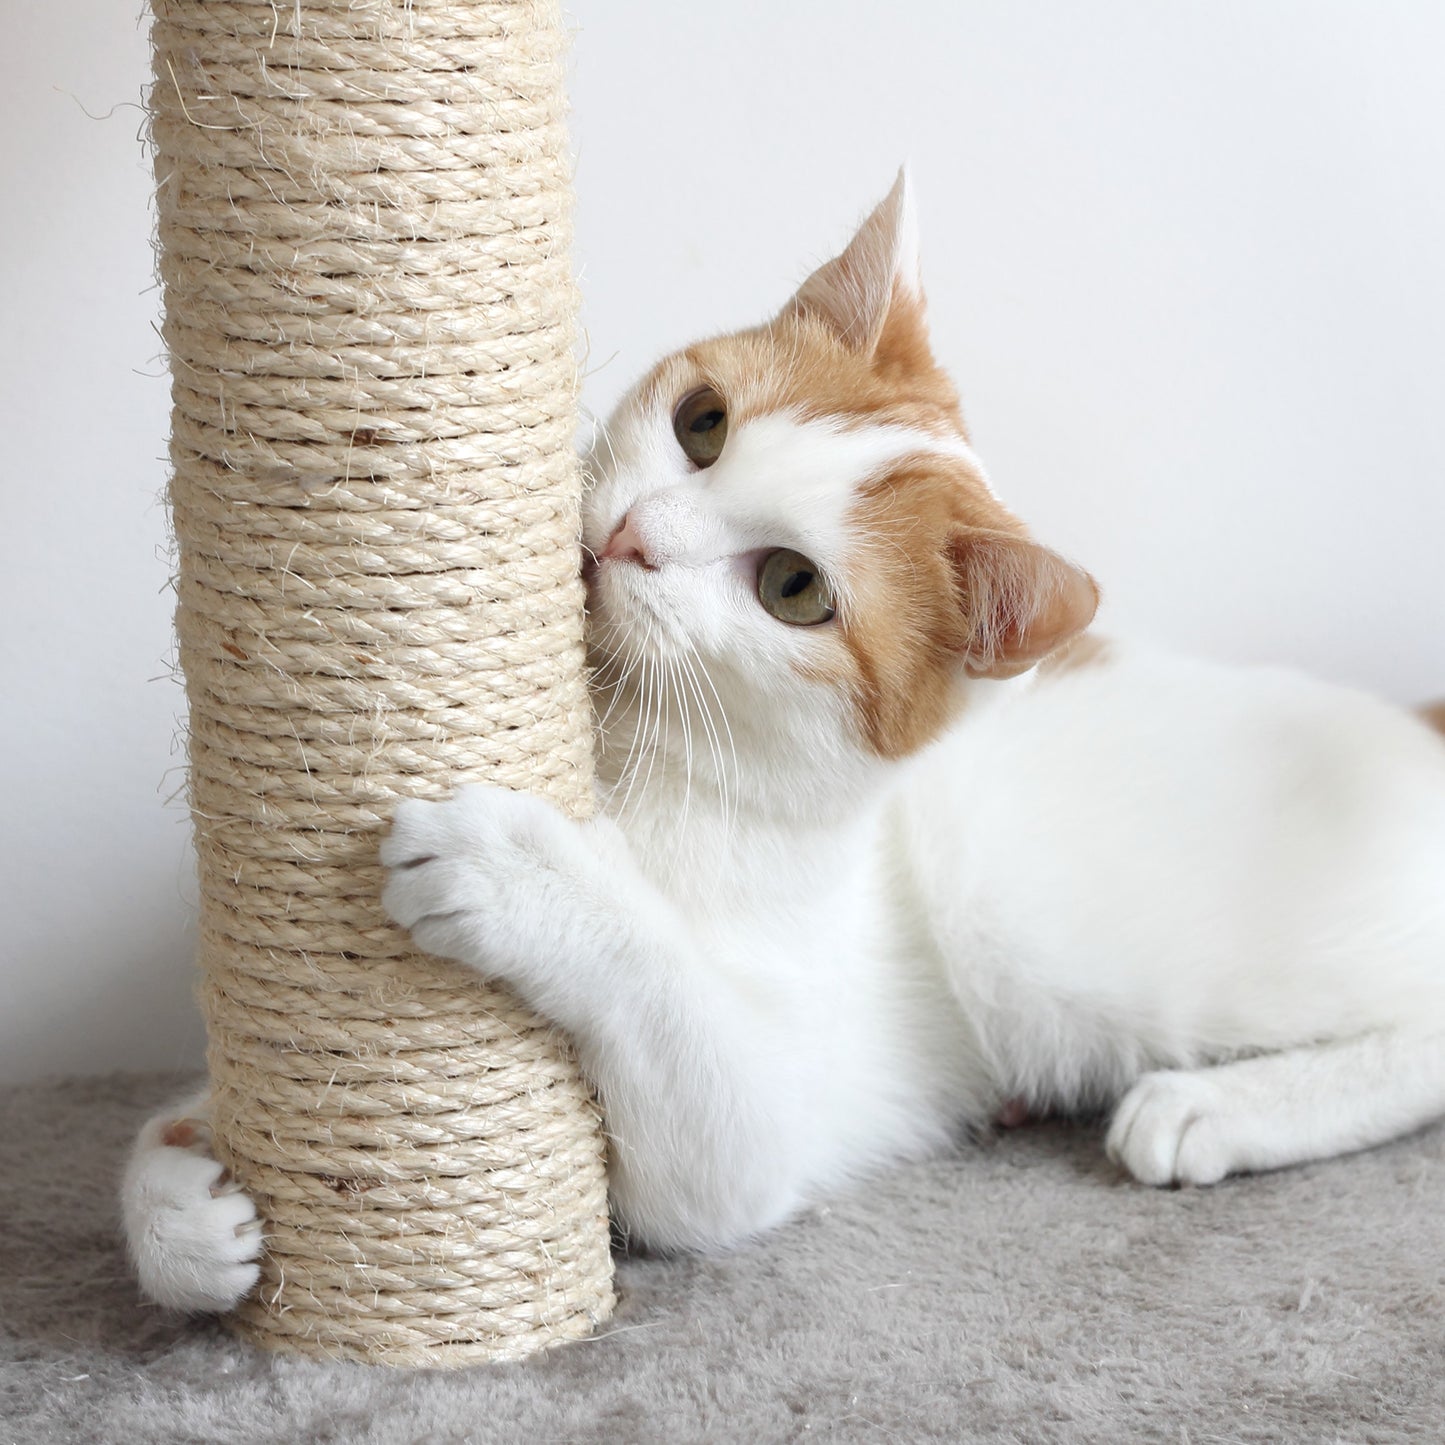 3-Post Cat Scratching Tower